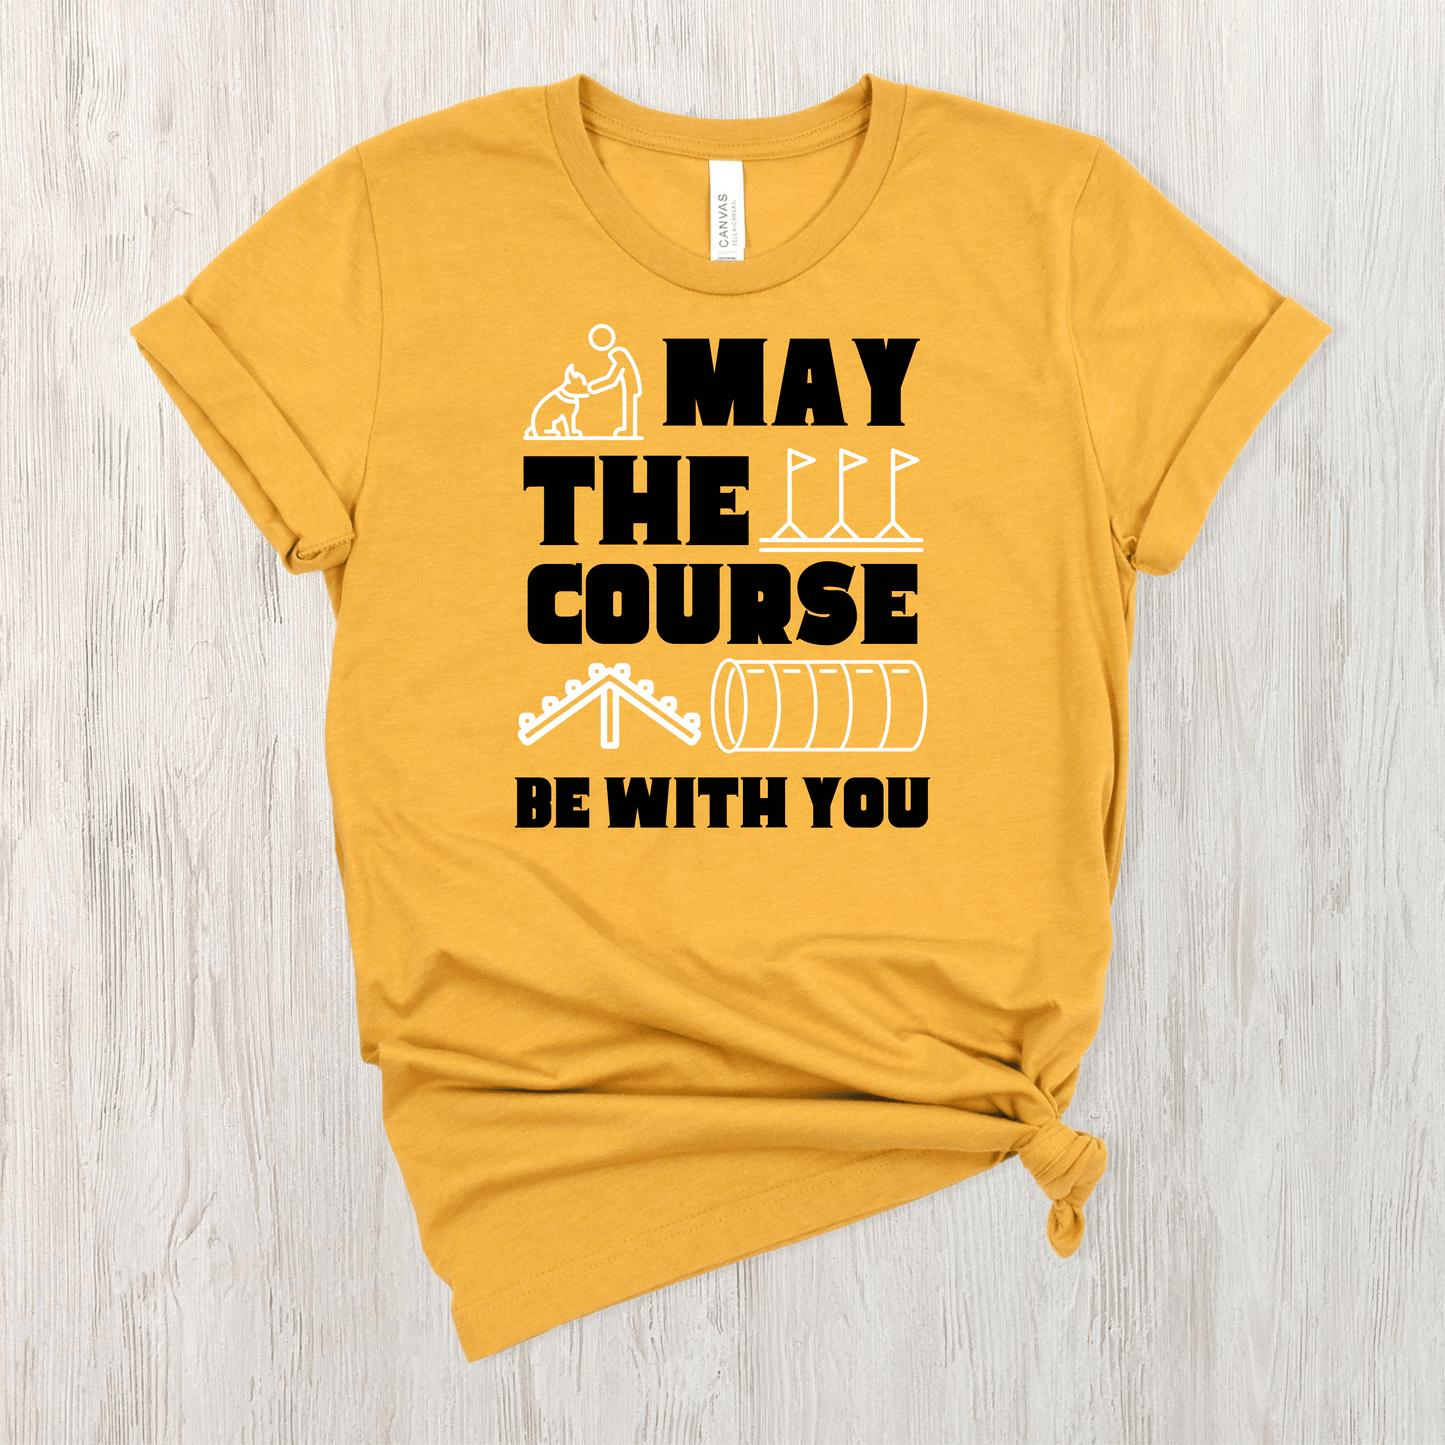 Mustard Heather tee featuring the text "May The Force Be With You" as well as agility related images.